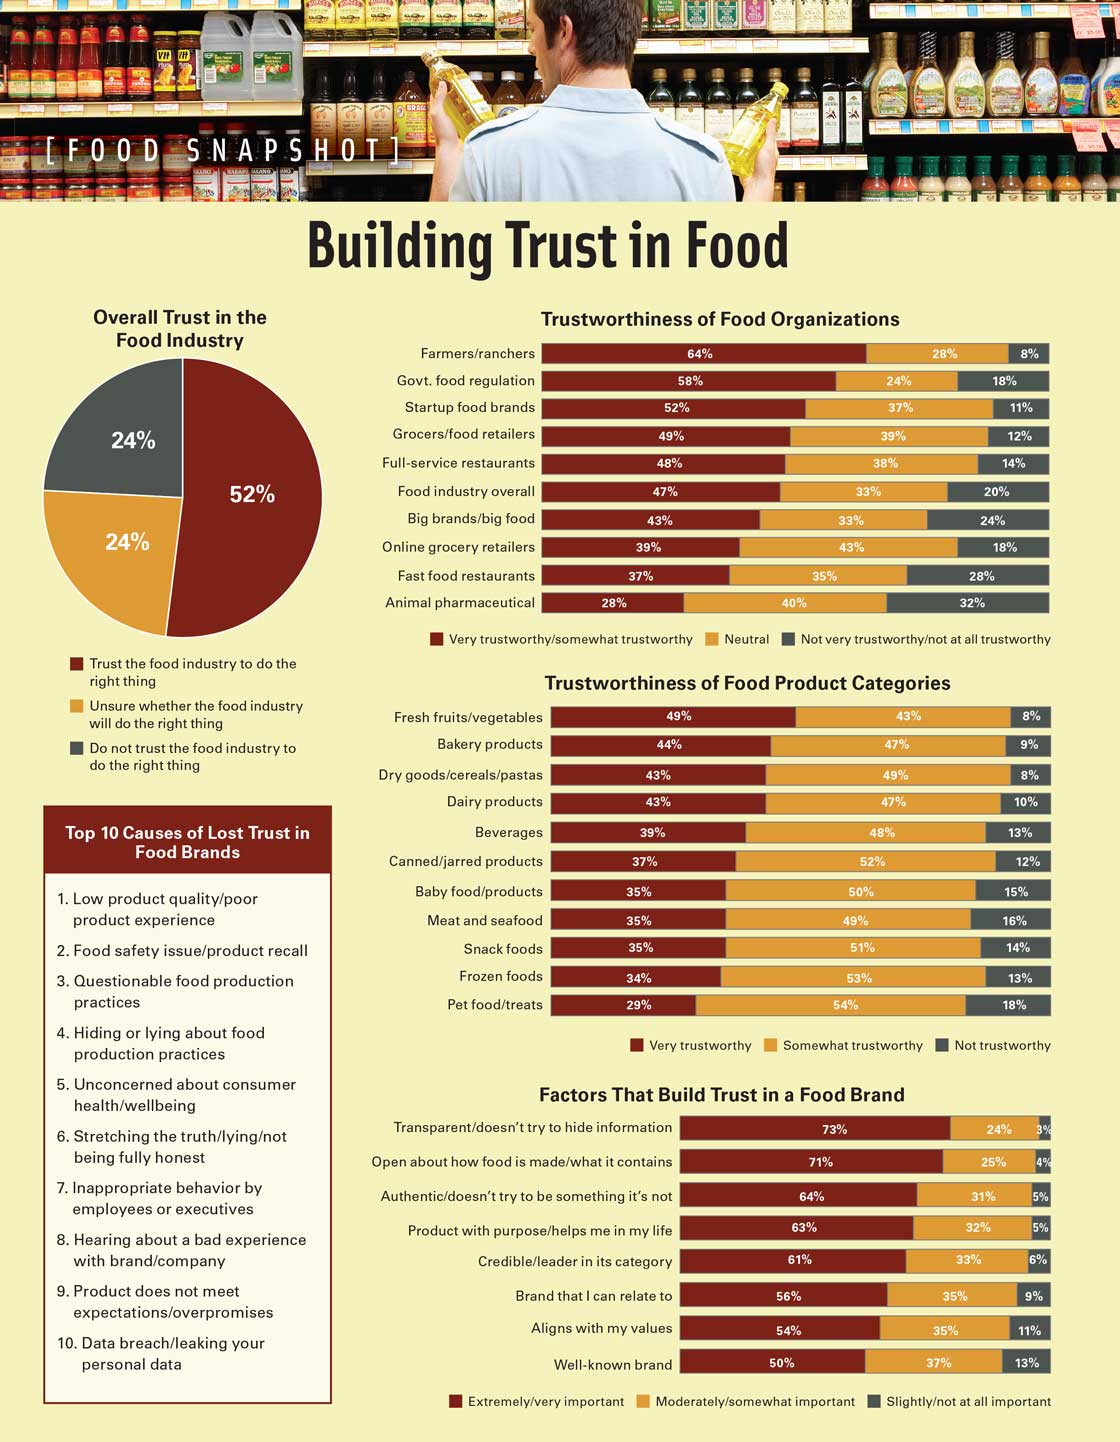 Building Trust in Food. Source: “Trust in Food,” FoodThink from Signal Theory, 2018.